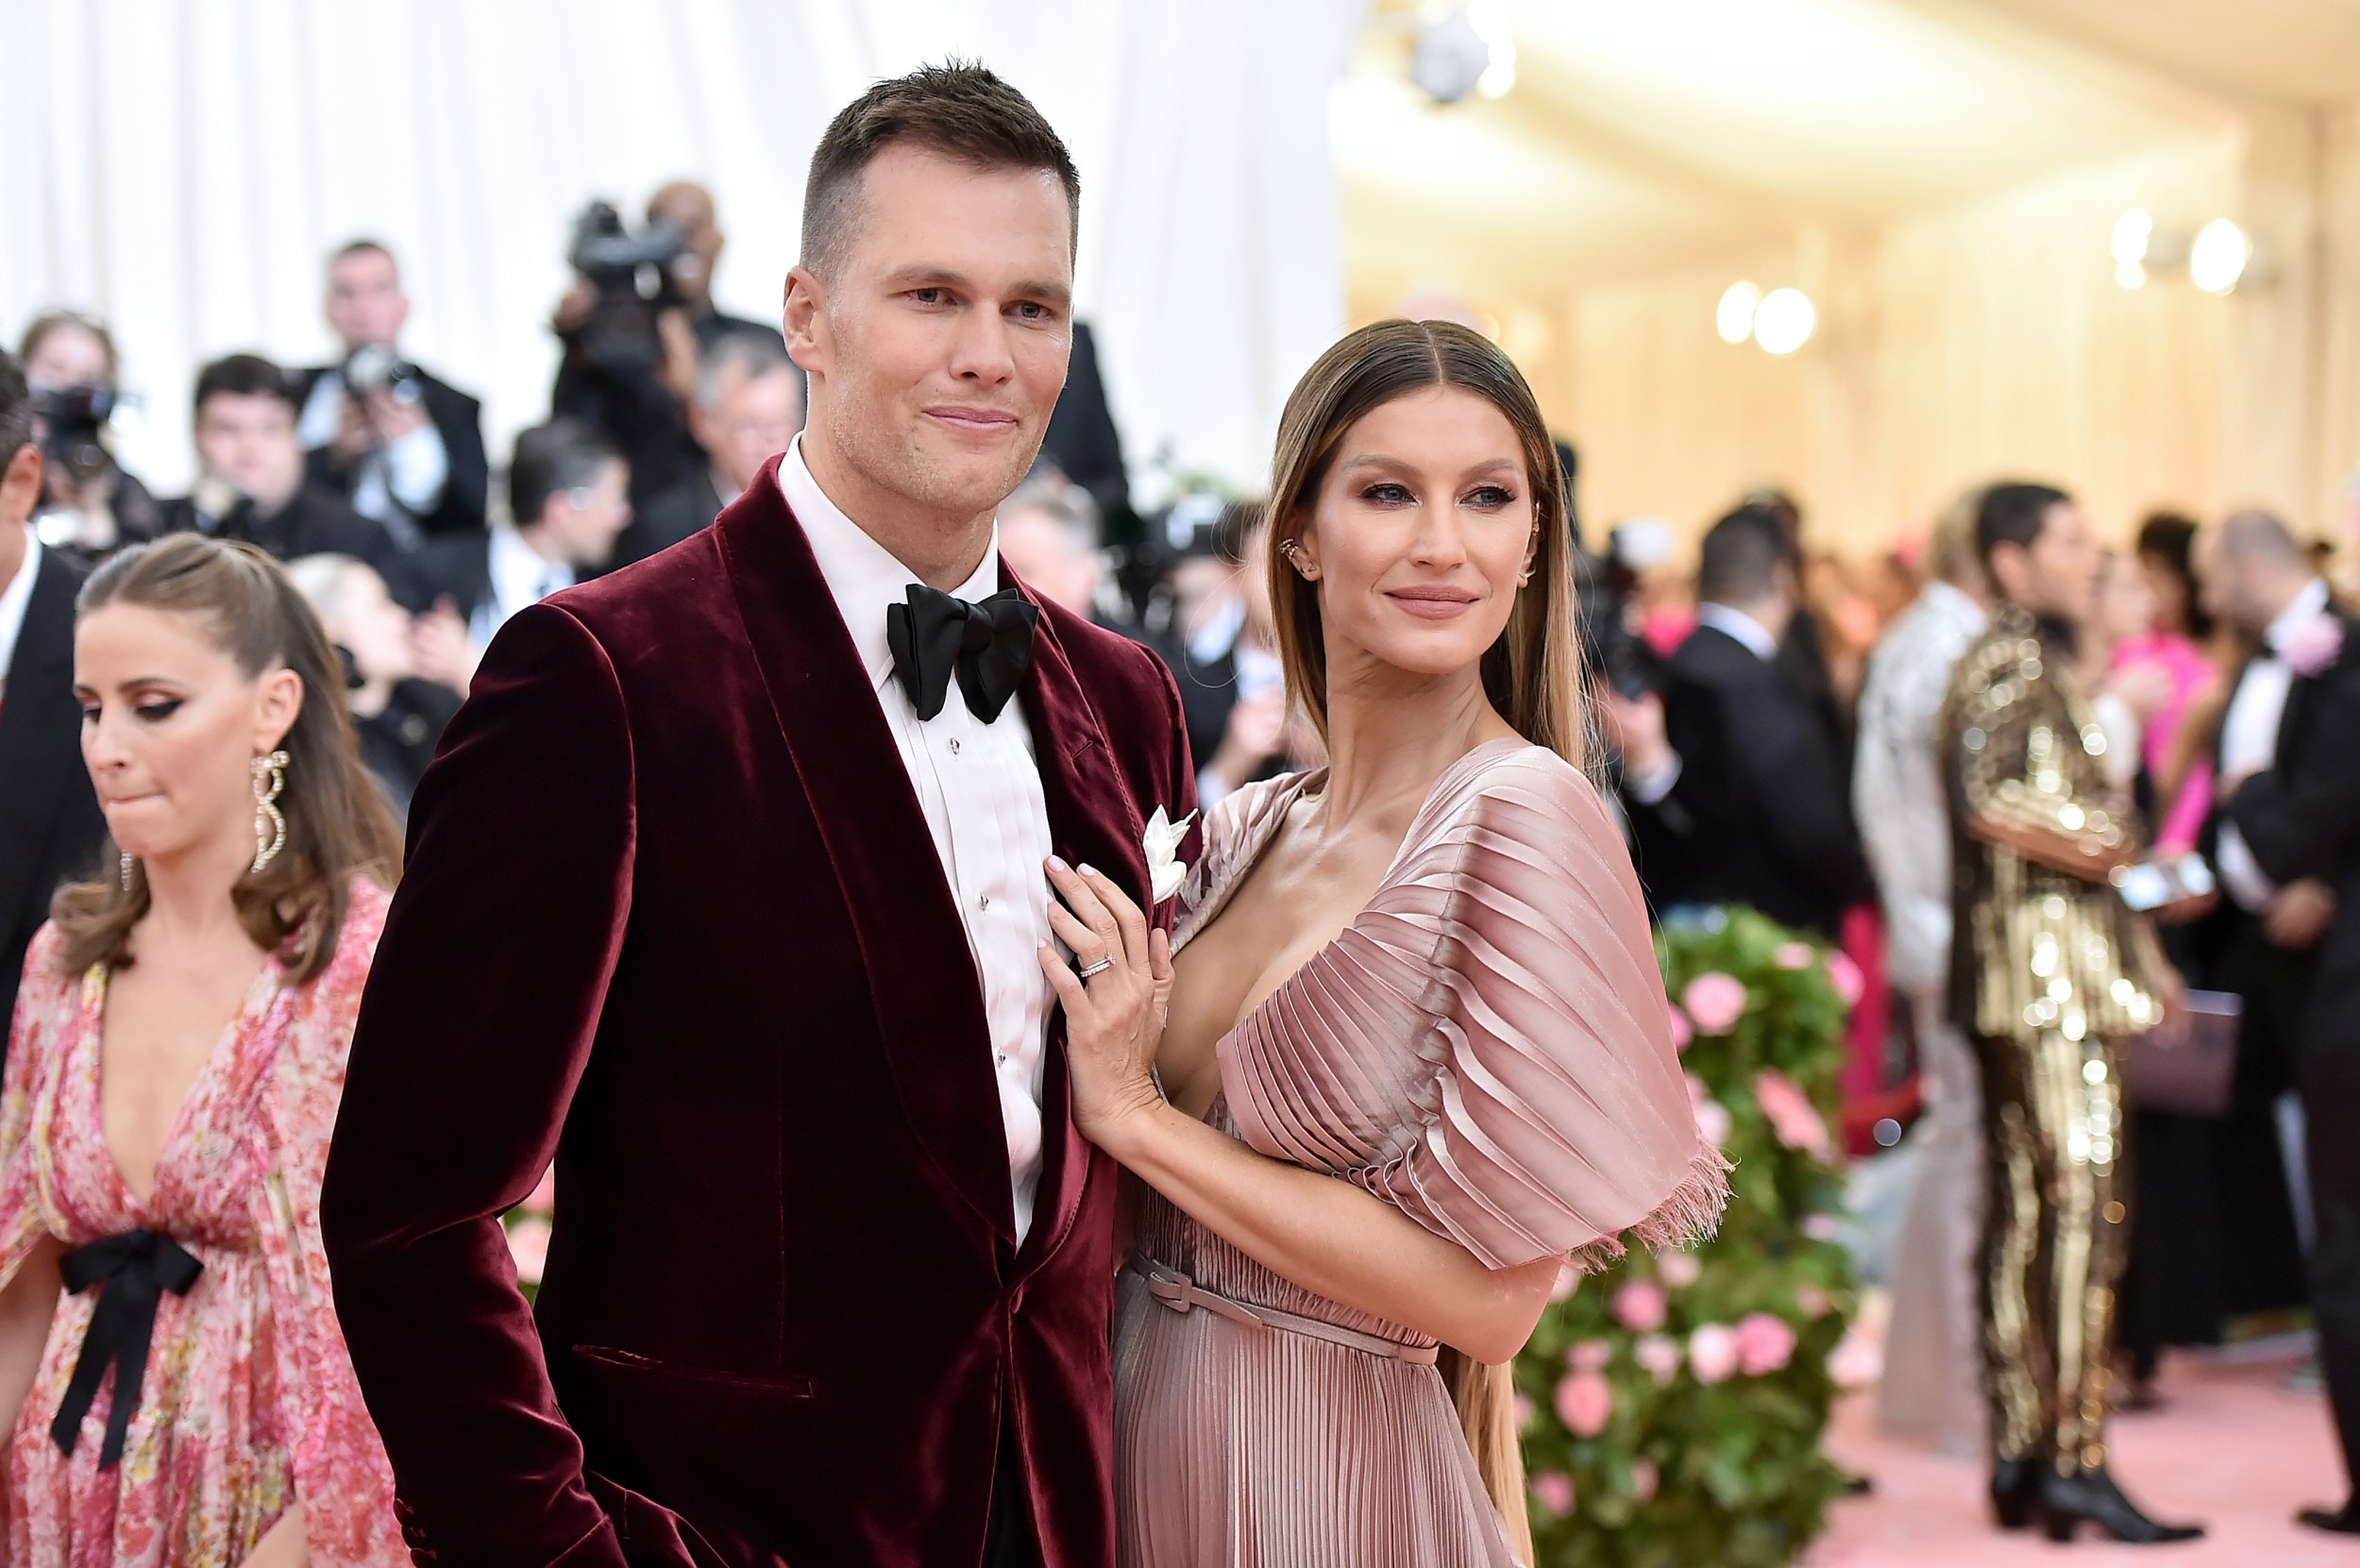 Are Tom Brady And Gisele Bundchen Getting Divorced? Couple Reportedly